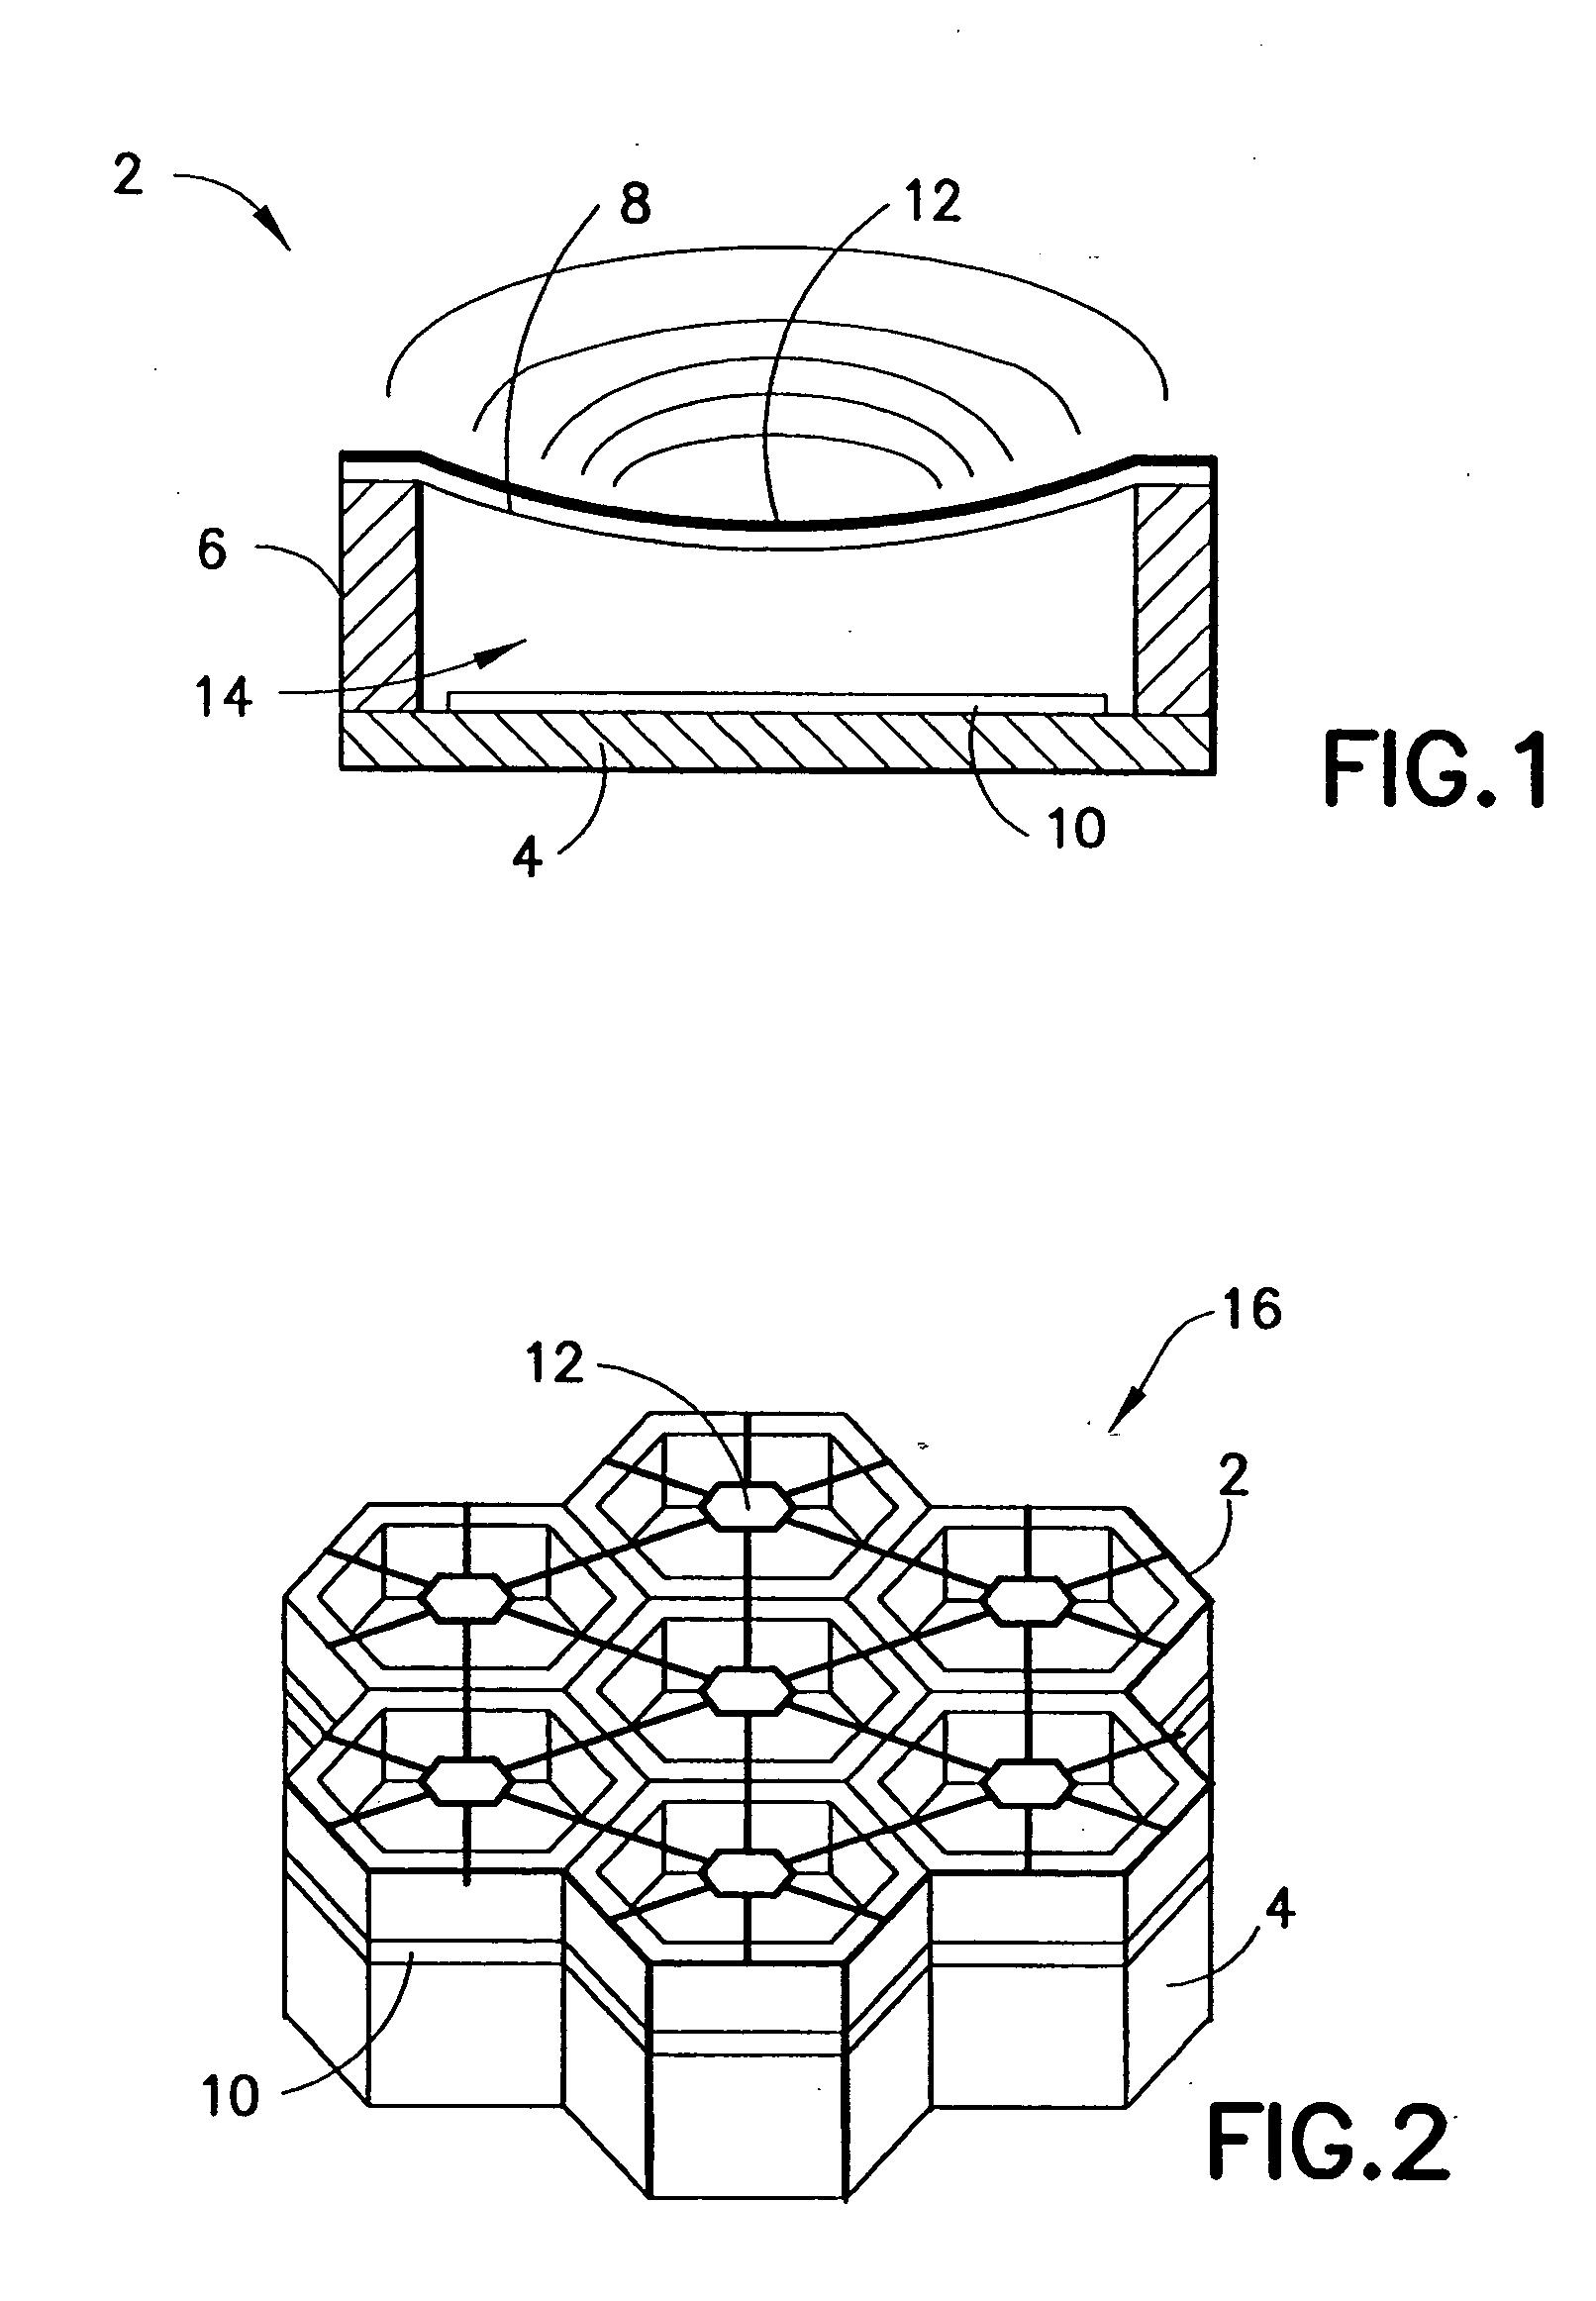 Optimized switching configurations for reconfigurable arrays of sensor elements